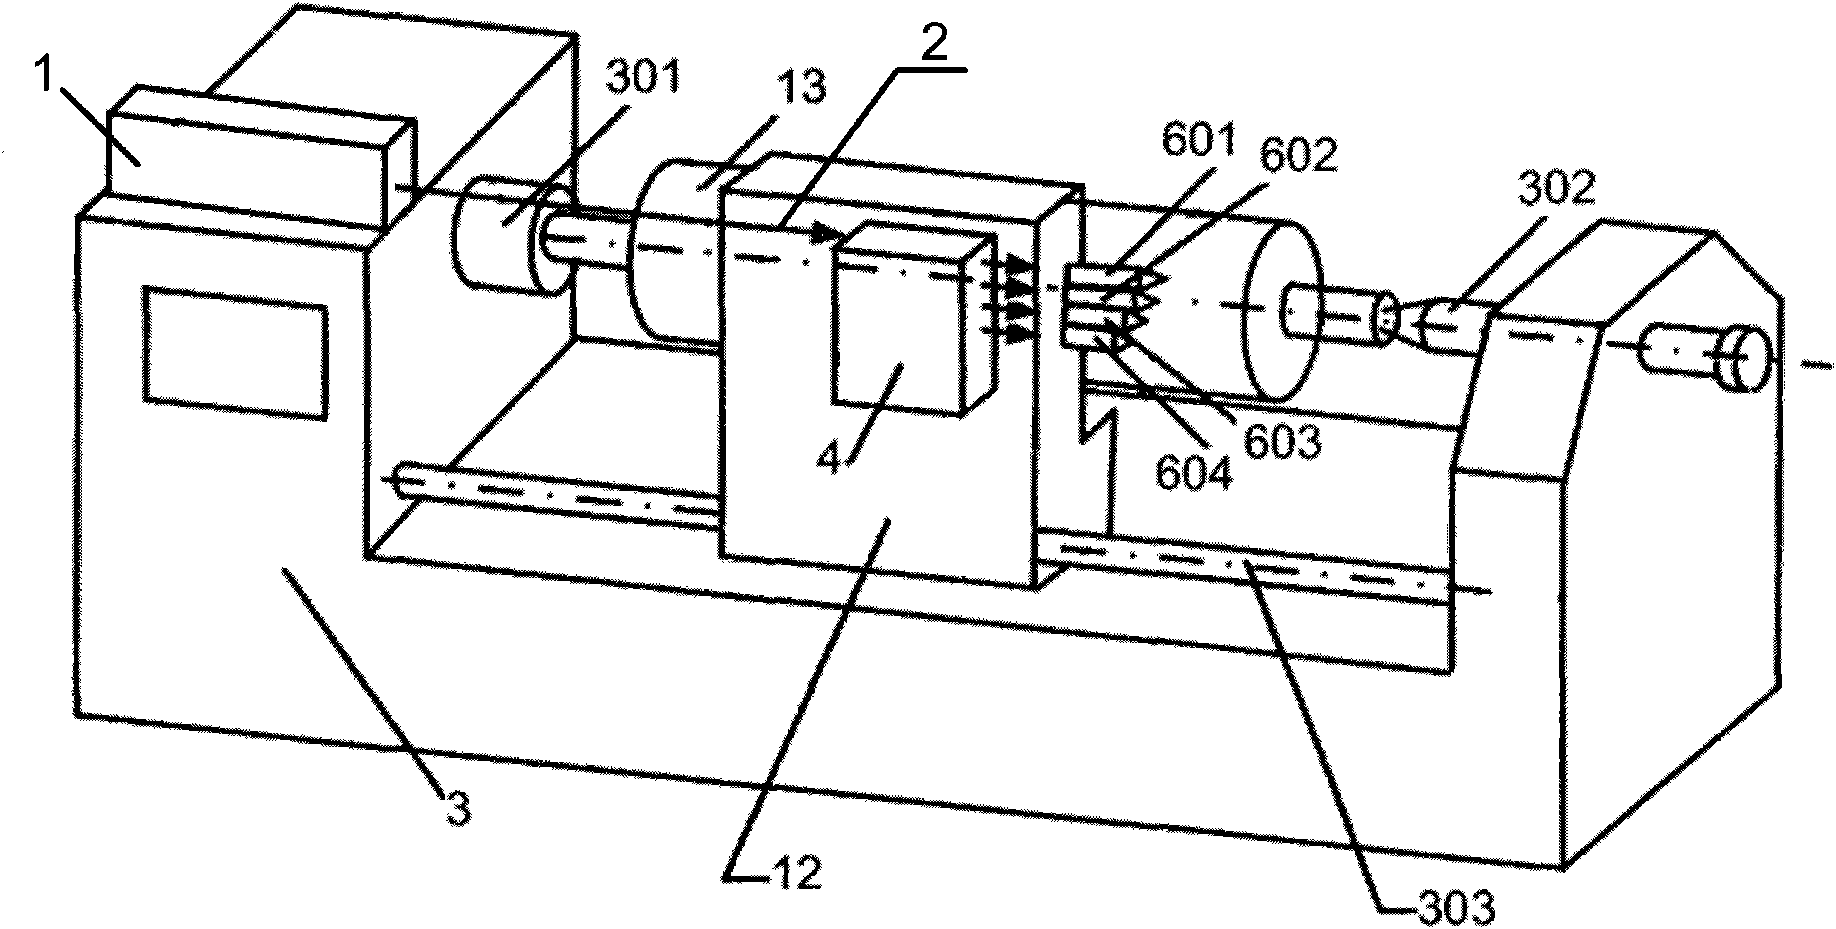 Swinging-focal spot laser roller surface texturing method and device